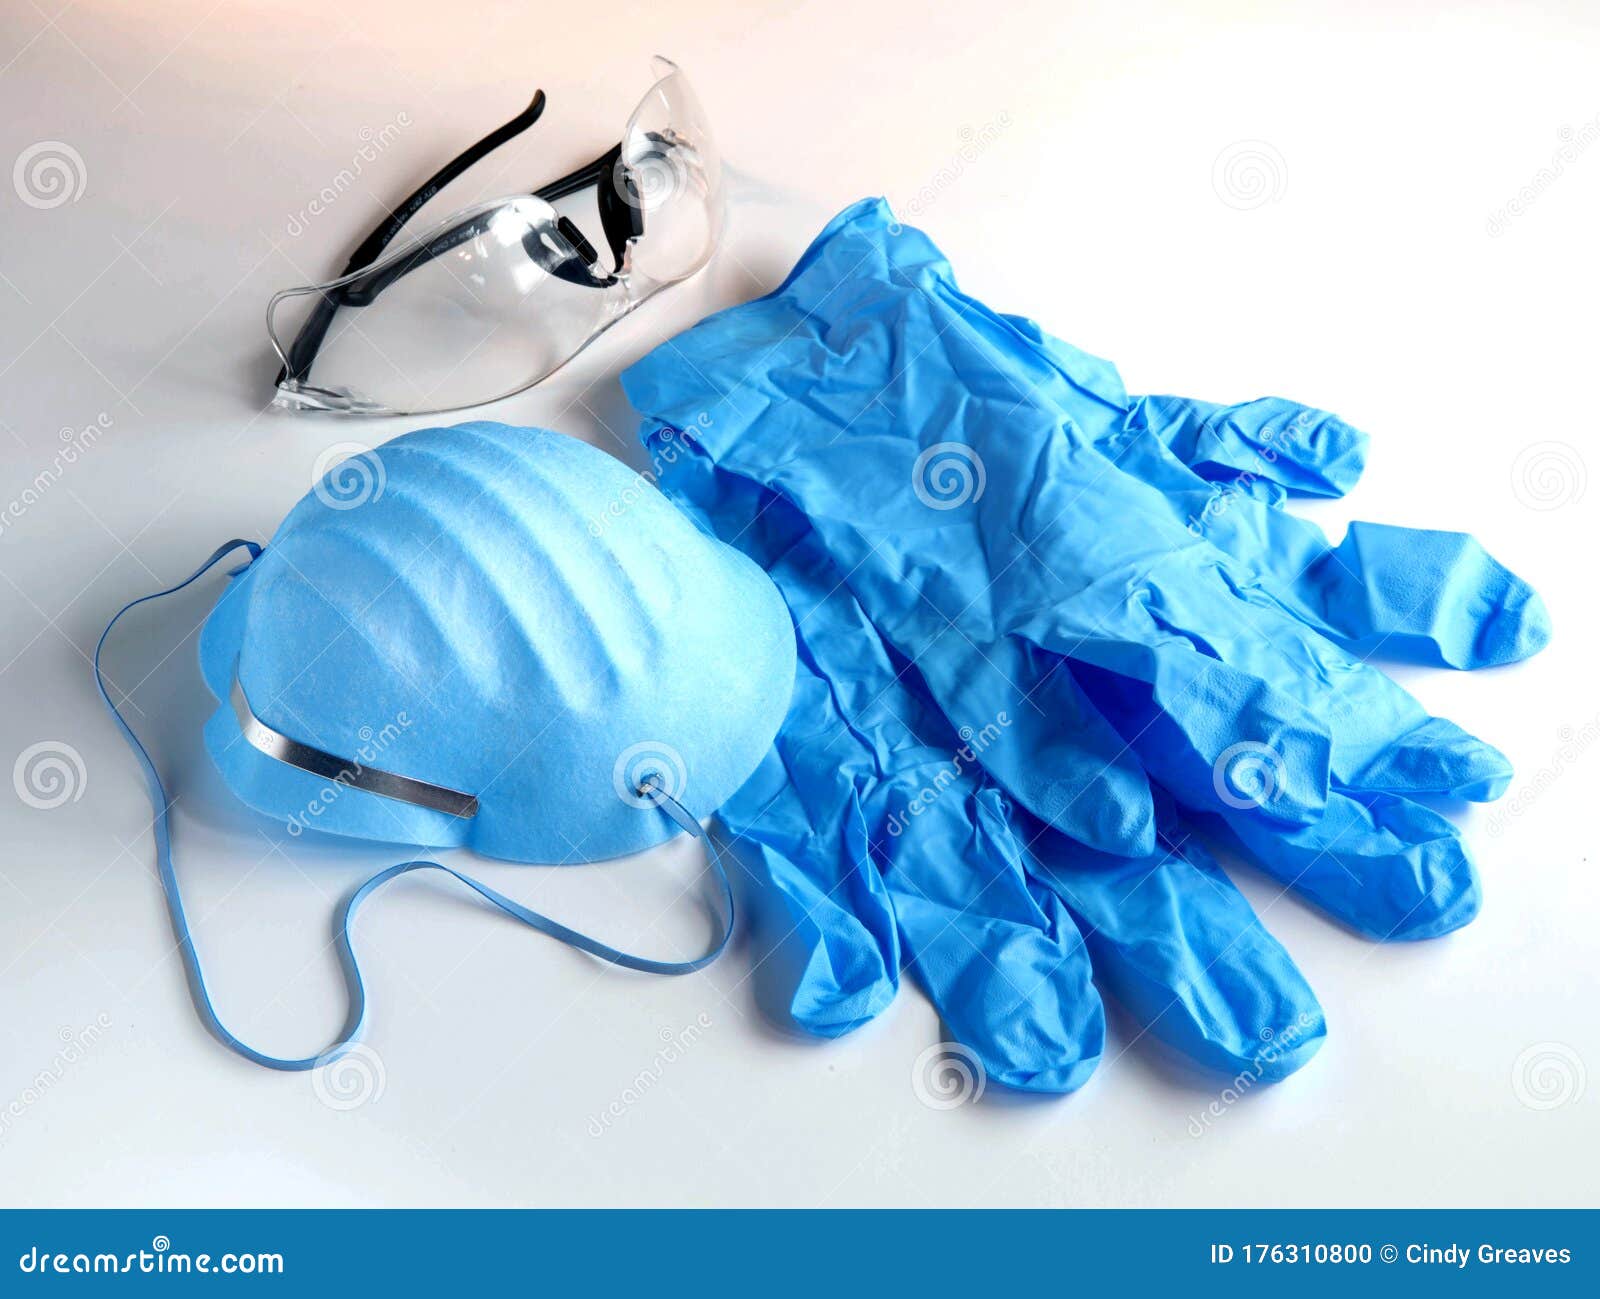 personal protection equipment for healthcare